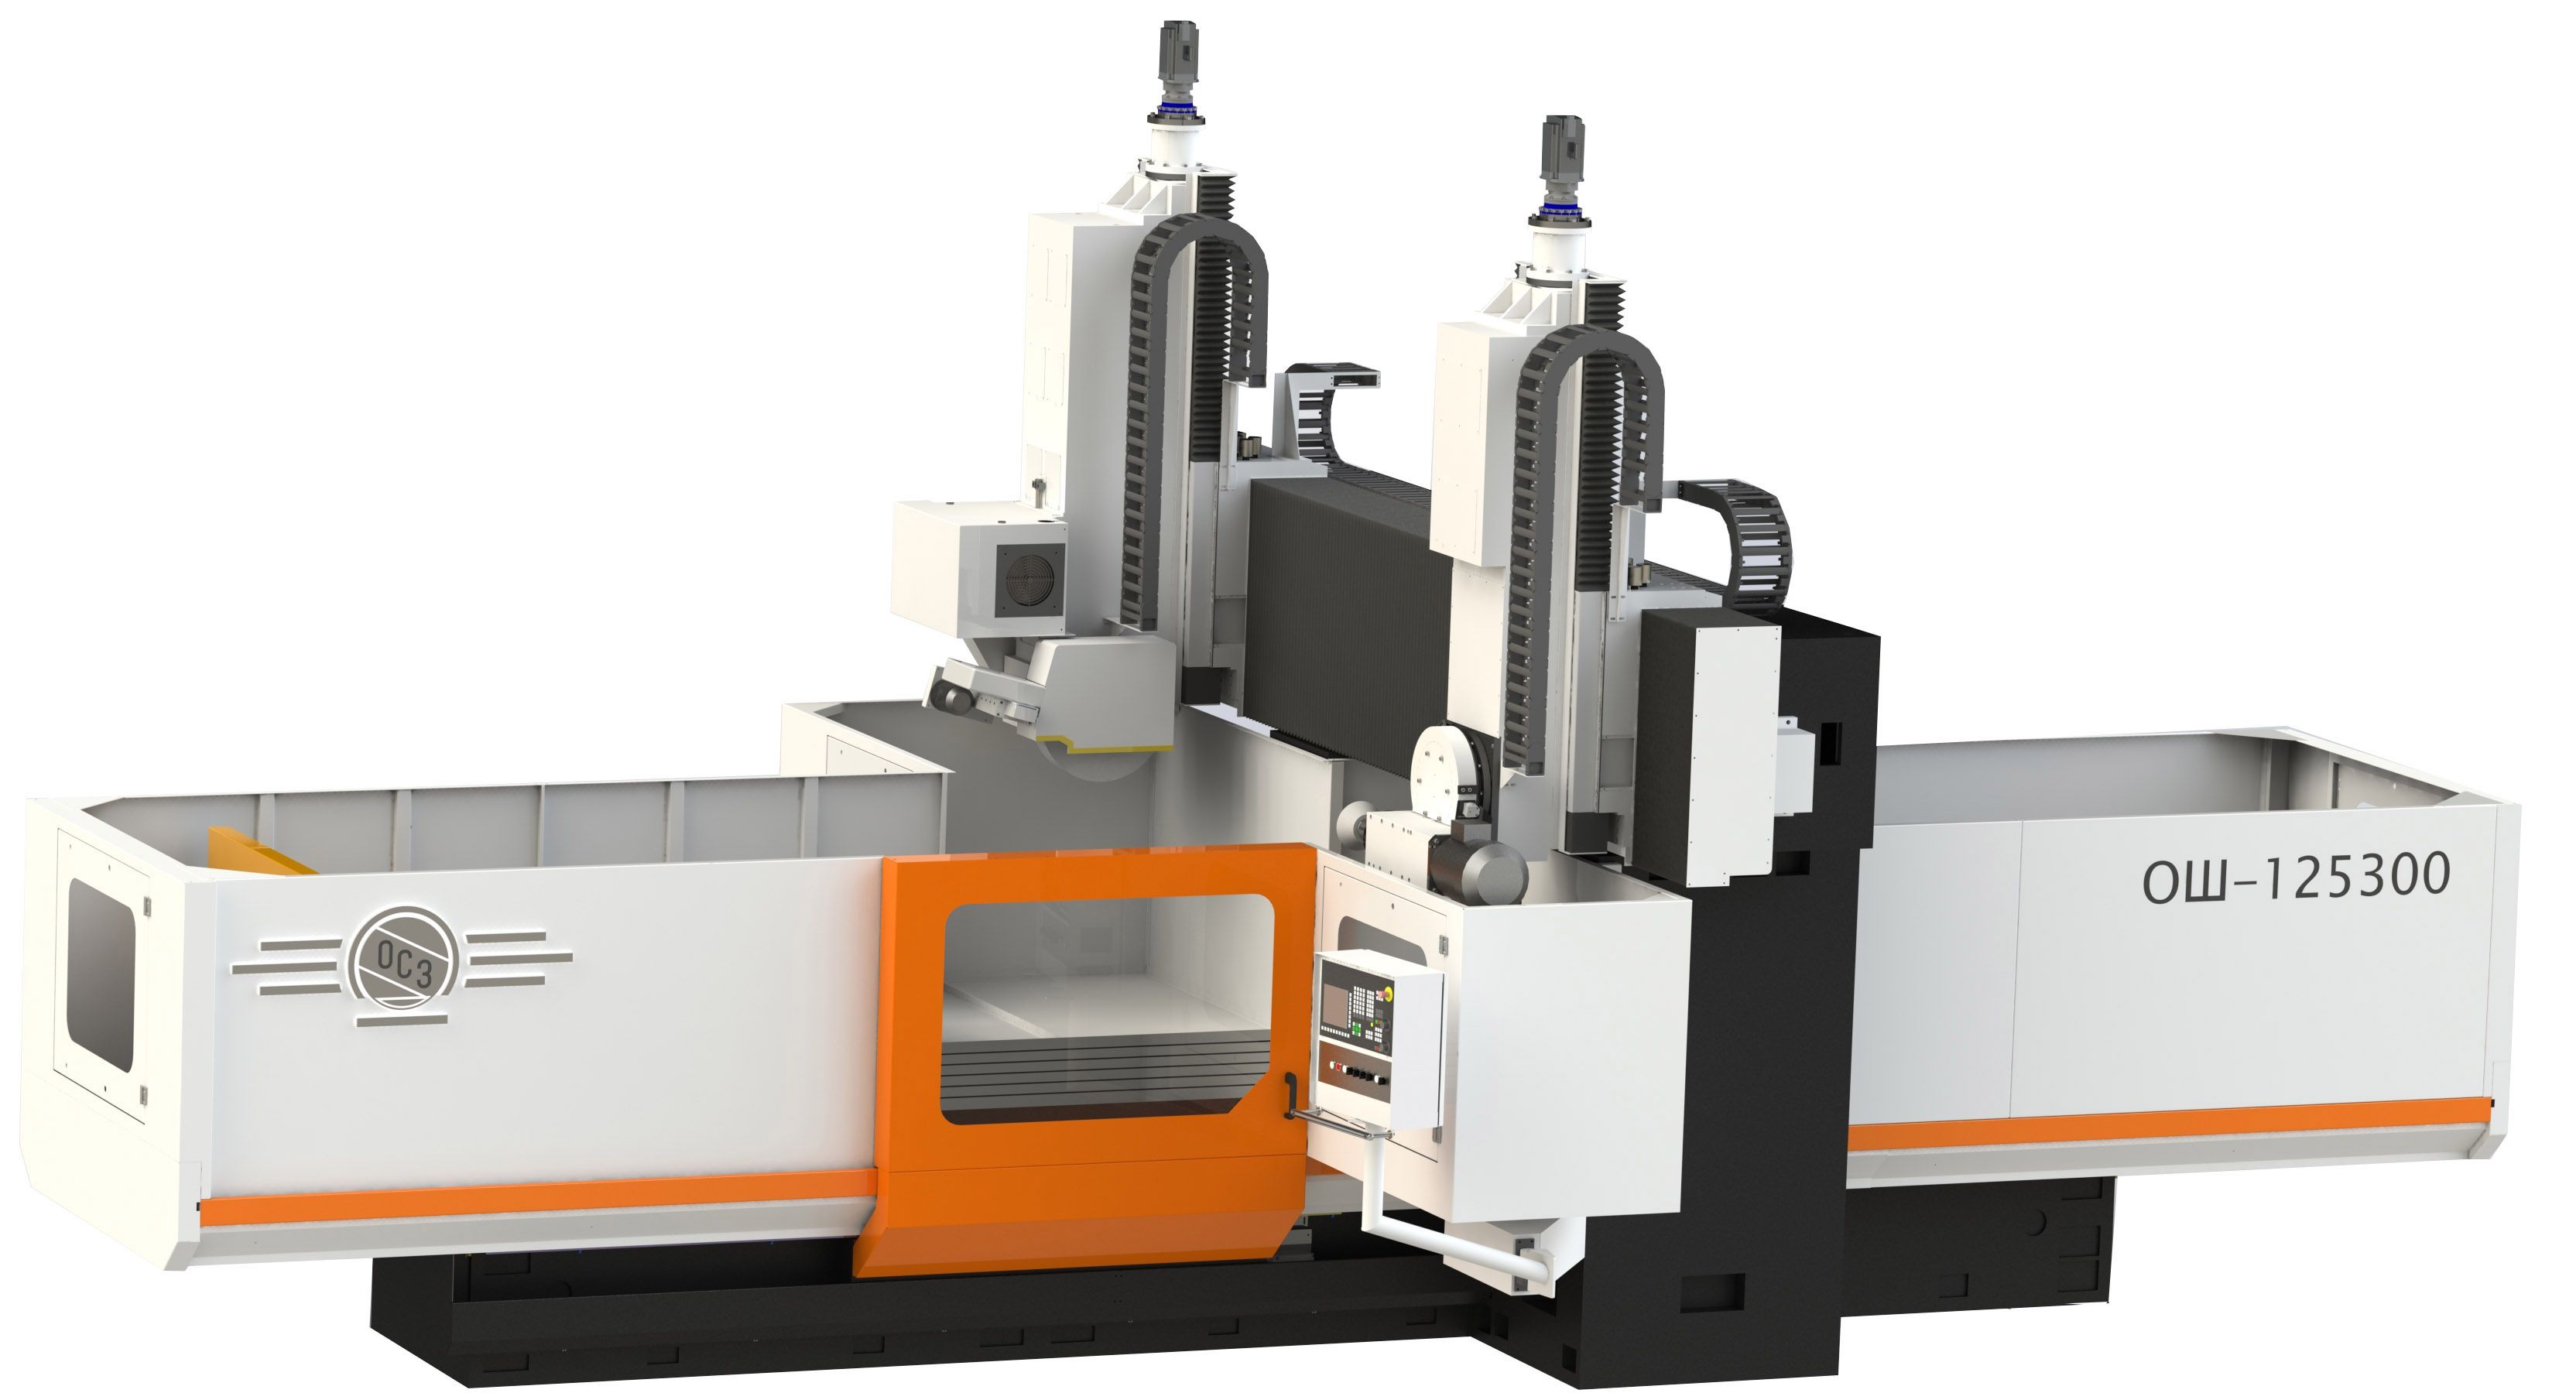 PORTAL (OVERHEAD GANTRY) SURFACE GRINDING MACHINE WITH CNC